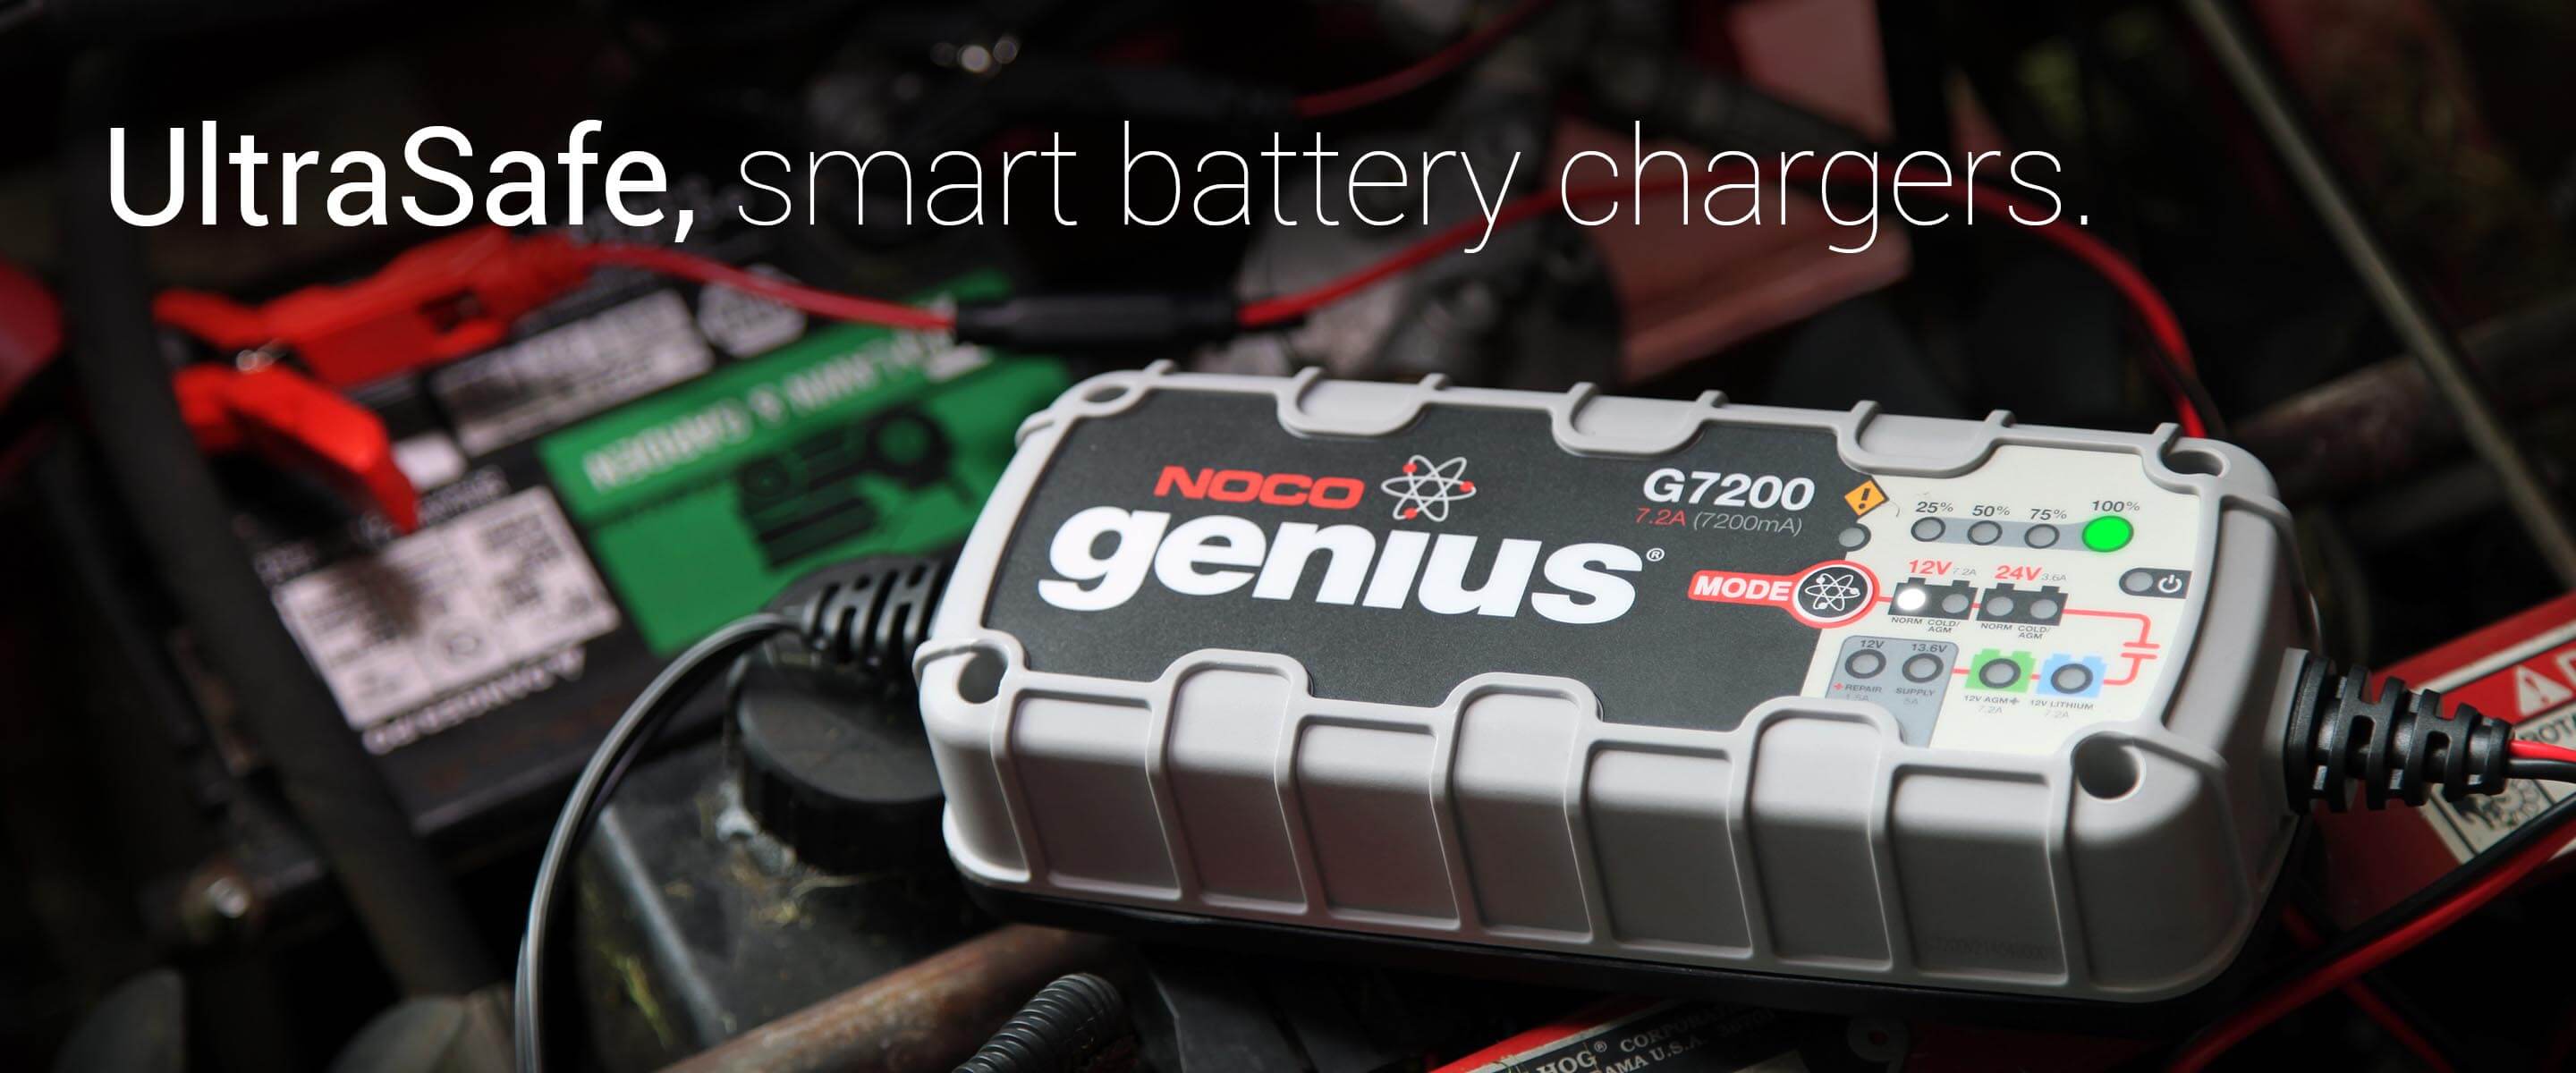 UltraSafe, smart battery chargers